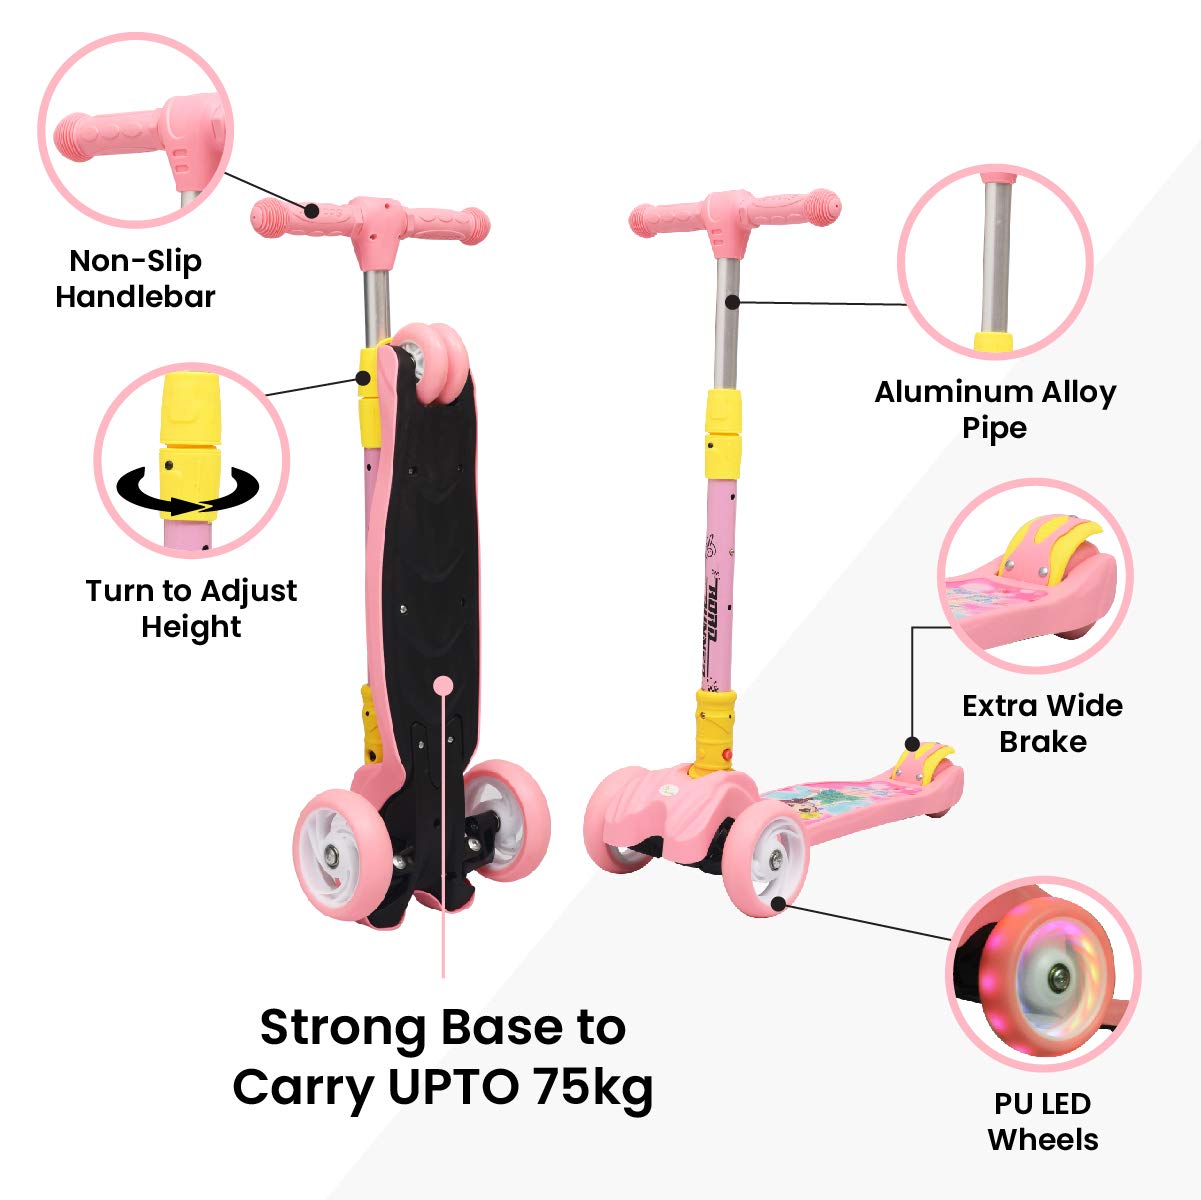 Road Runner Scooter for Kids - The Smart Kick Scooter (Pink) | R for Rabbit